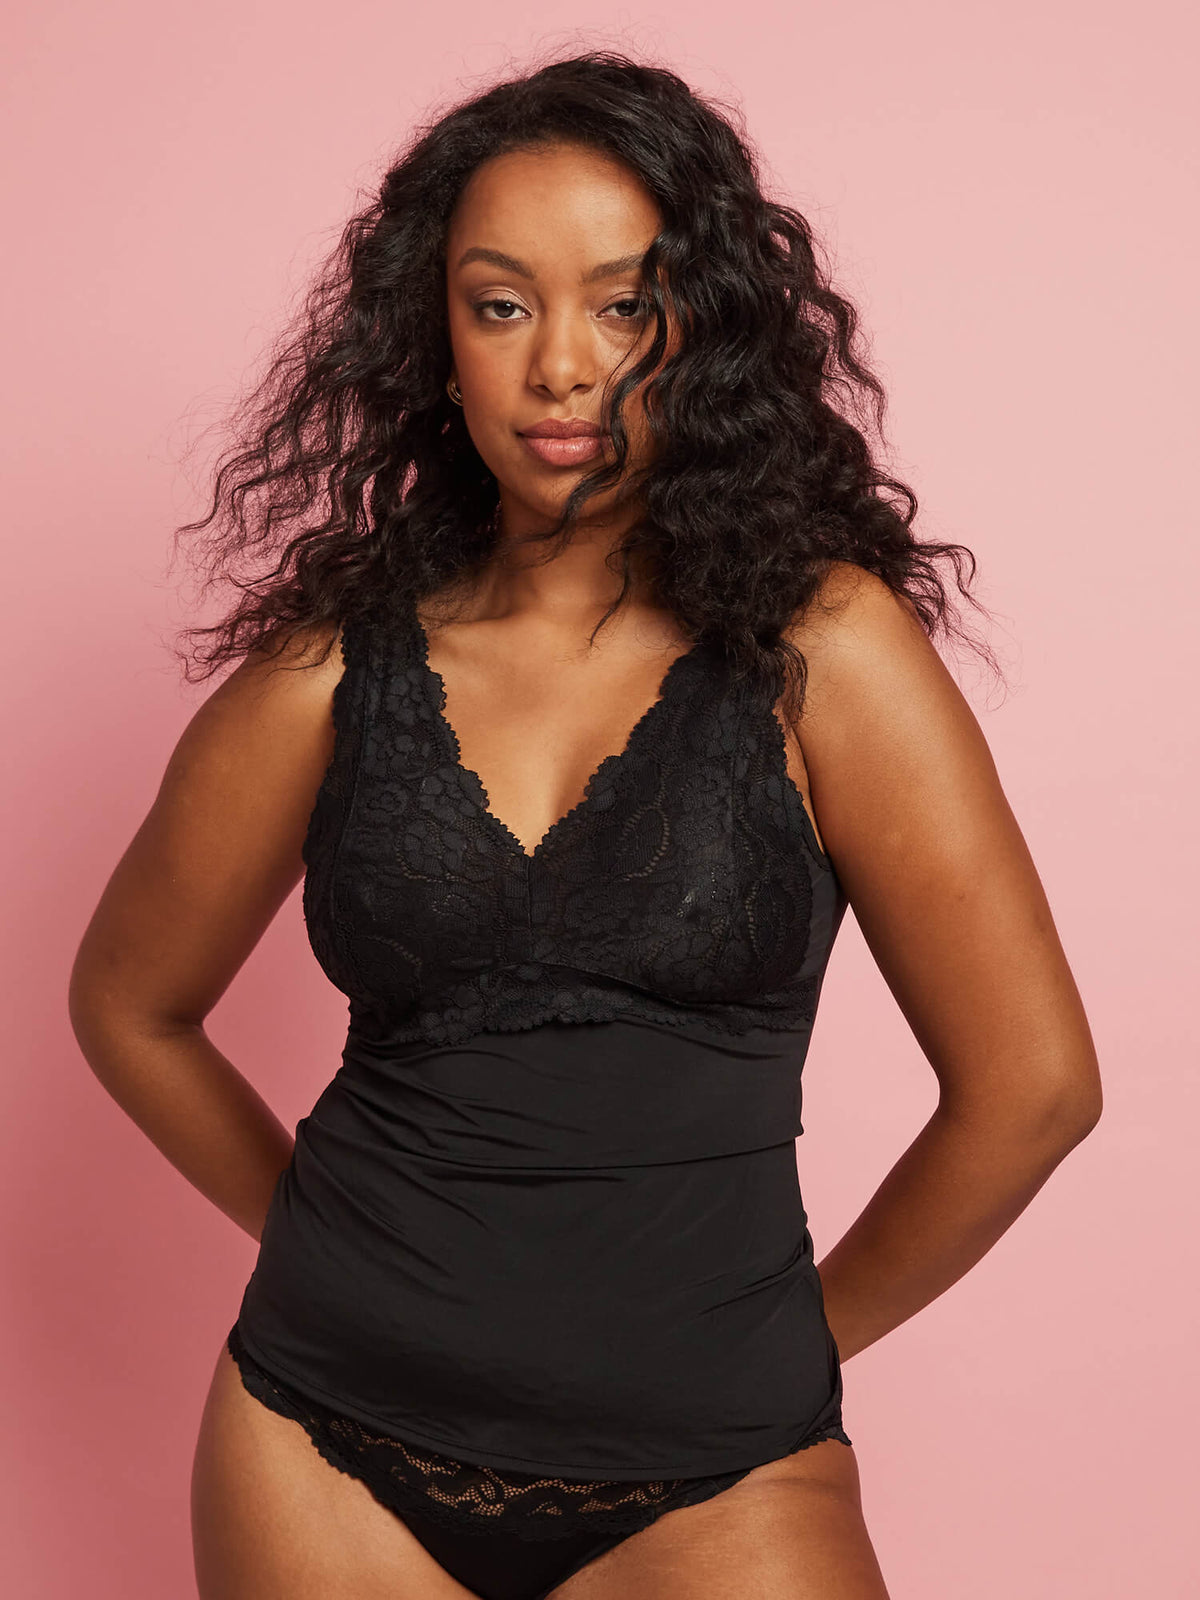 Helen Micro & Lace Camisole Top in Black - Kayser Lingerie